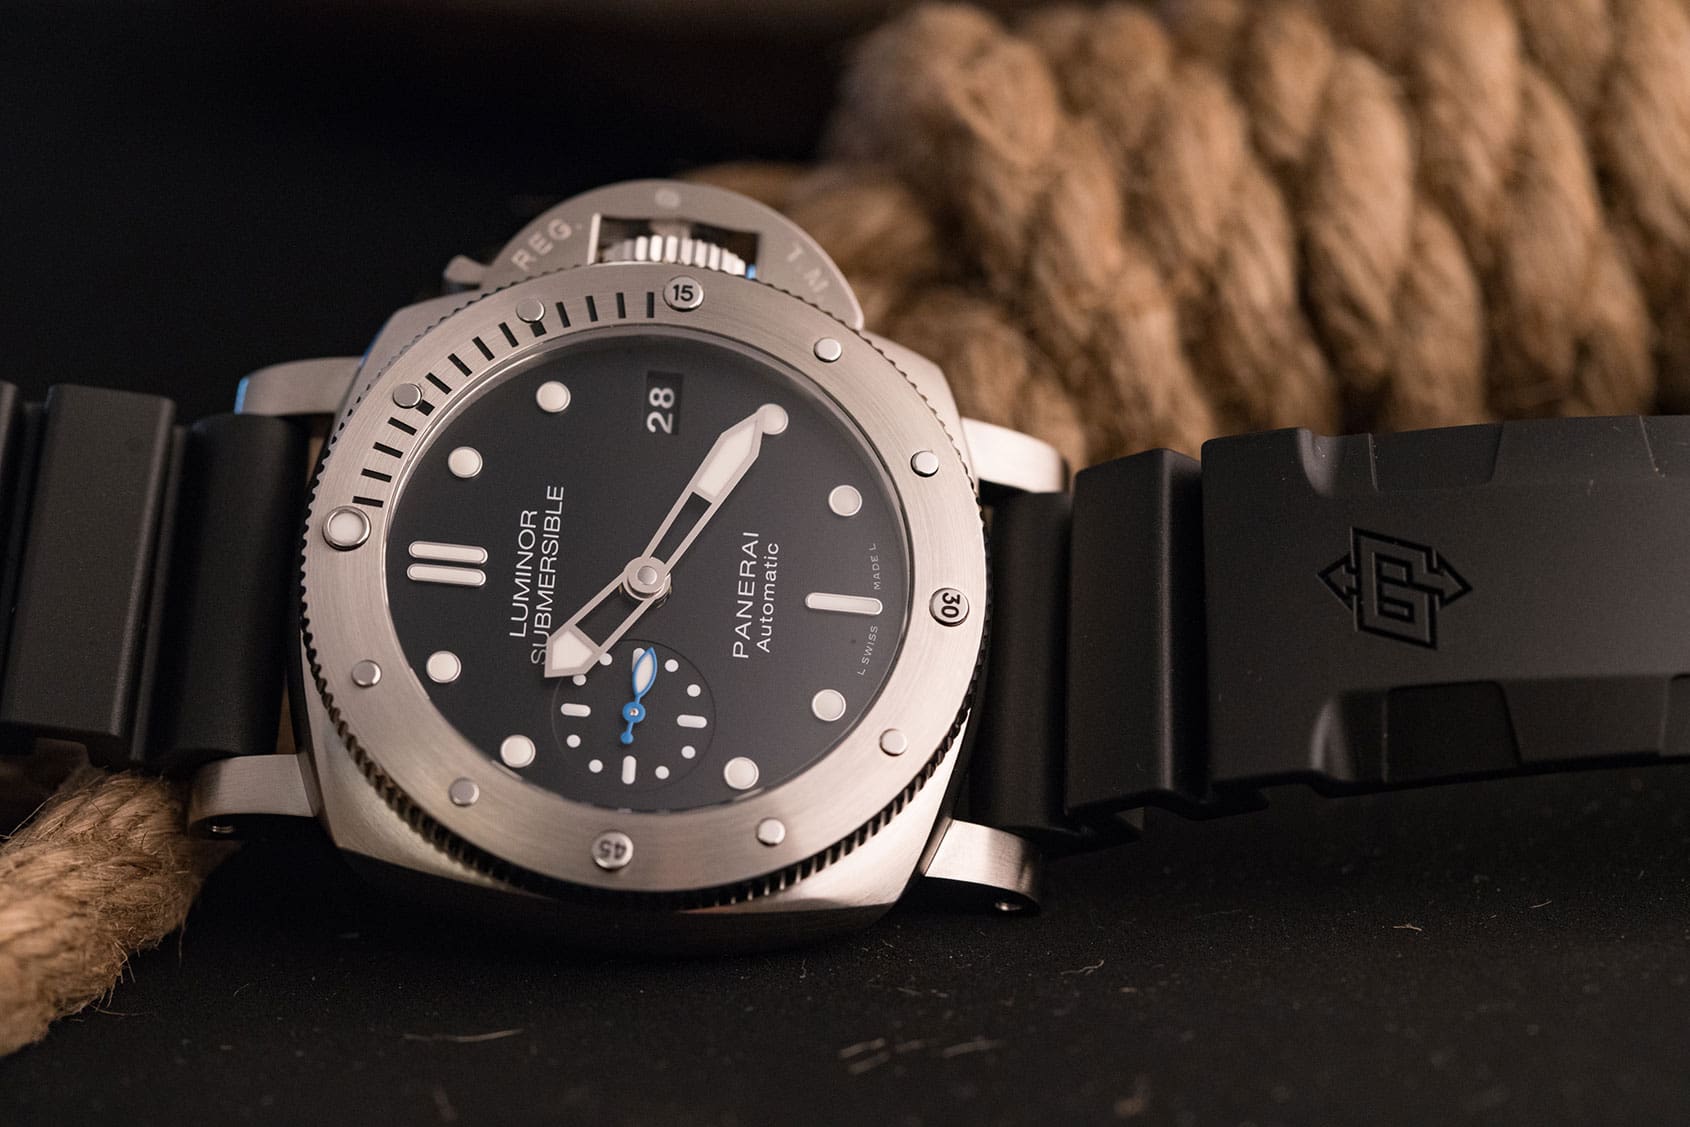 HANDS-ON: Small changes make a big impact – the Panerai Luminor Submersible 1950 3 Days Accio Automatic (PAM 682)